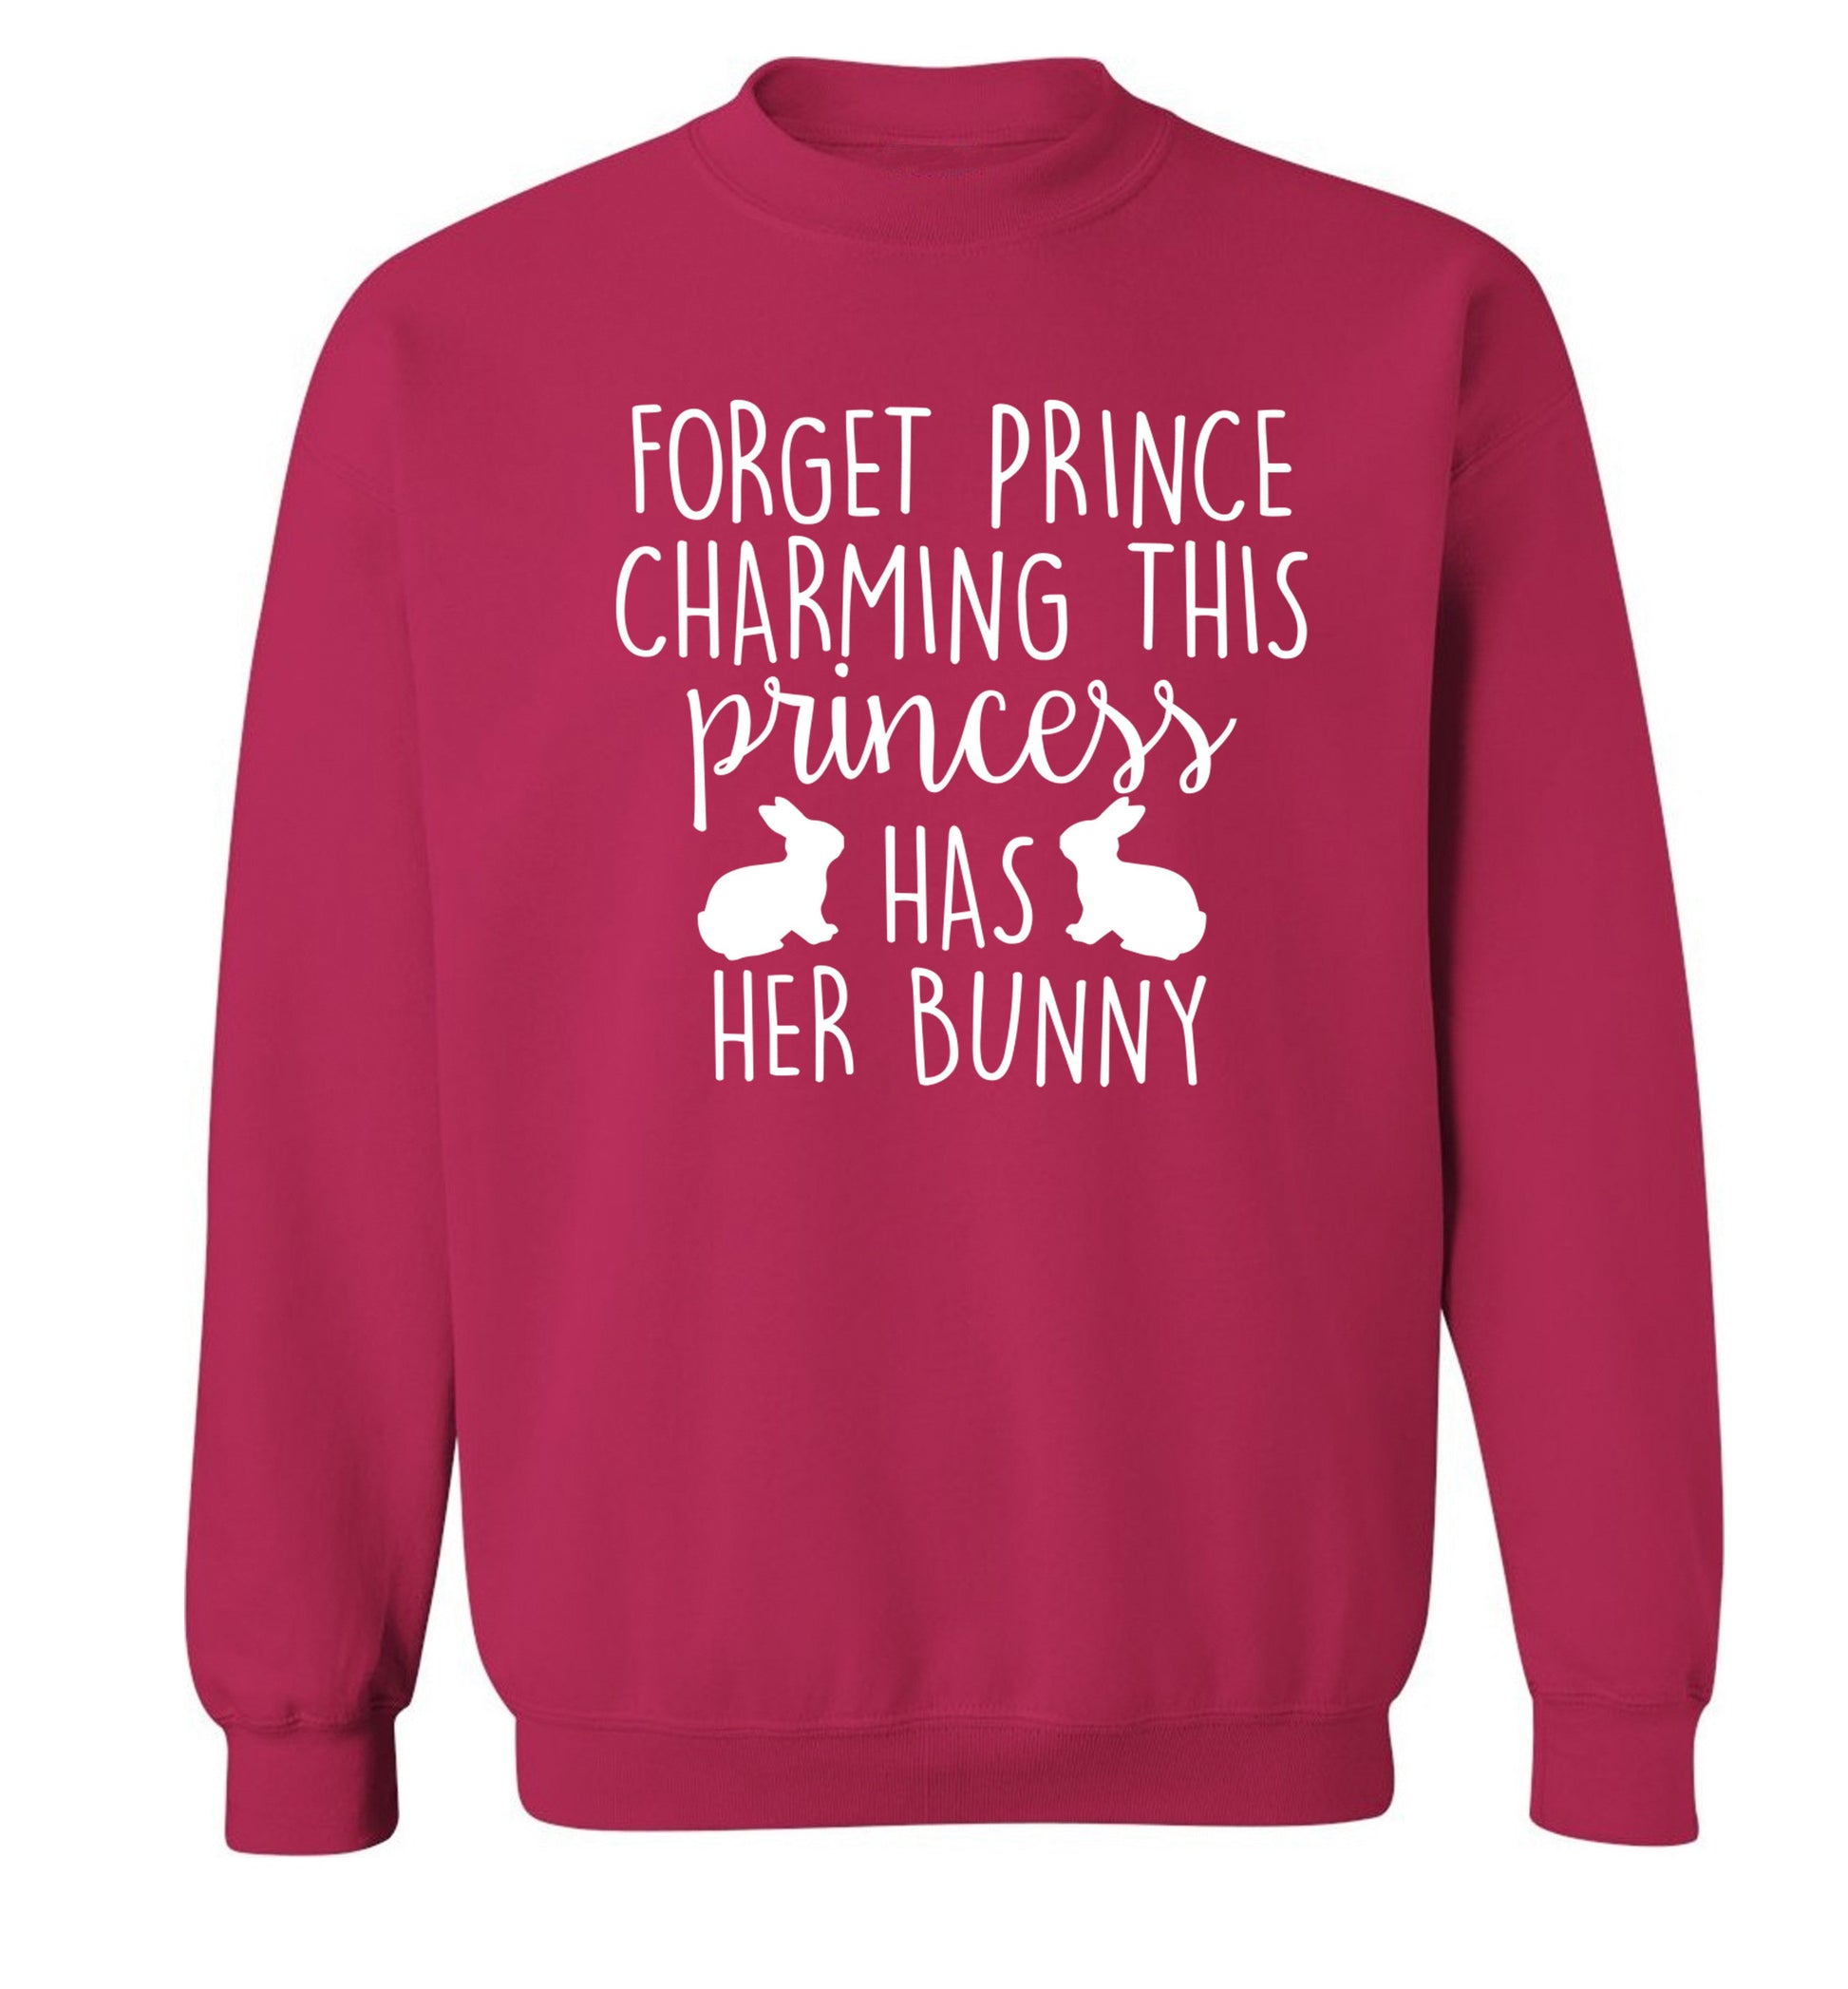 Forget prince charming this princess has her bunny Adult's unisex pink  sweater XL